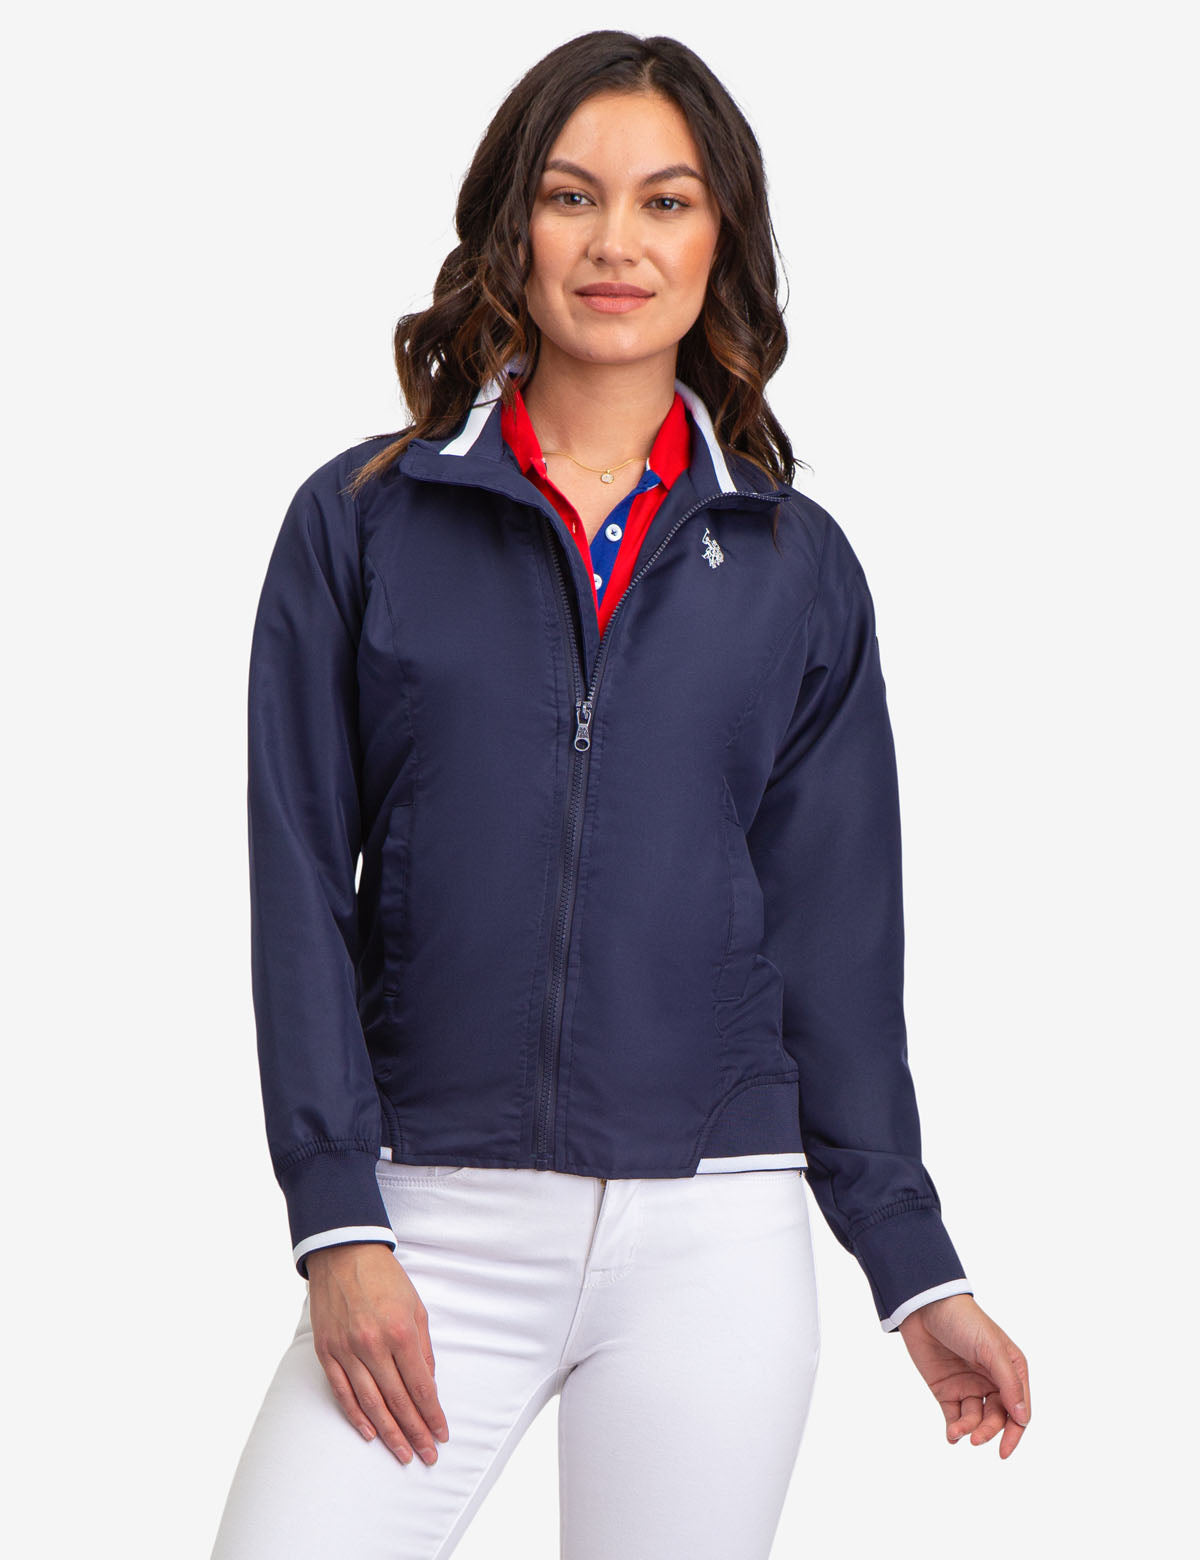 red polo jacket women's